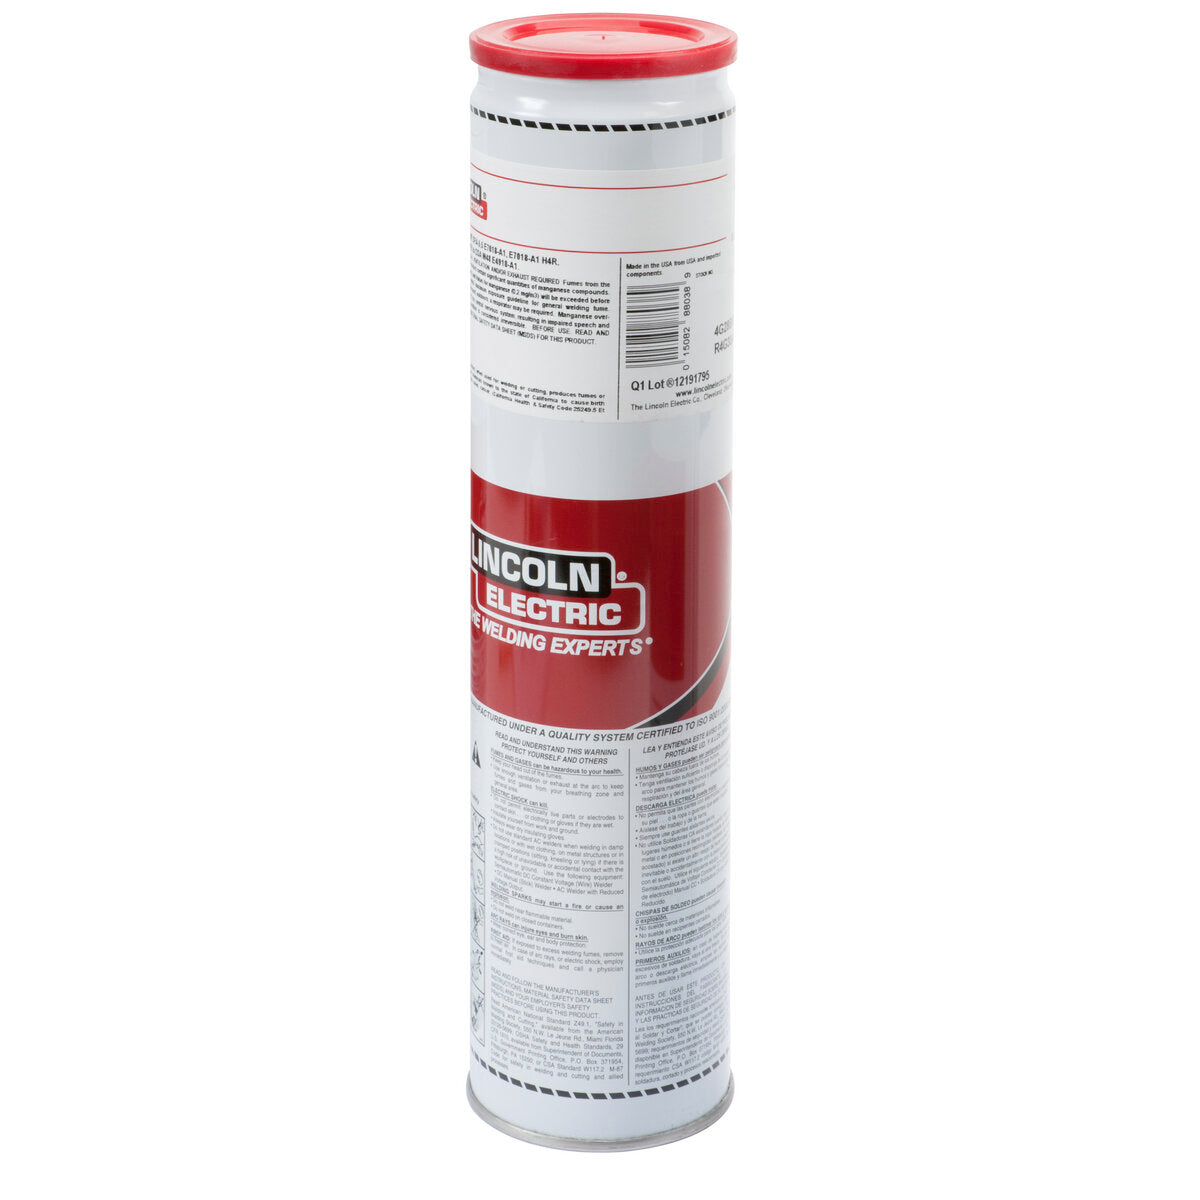 Lincoln Electric - Excalibur® 316/316L-15 Stick (SMAW) Electrode, 3/32x12 in, (3) 8 lb Easy Open Can - ED033108